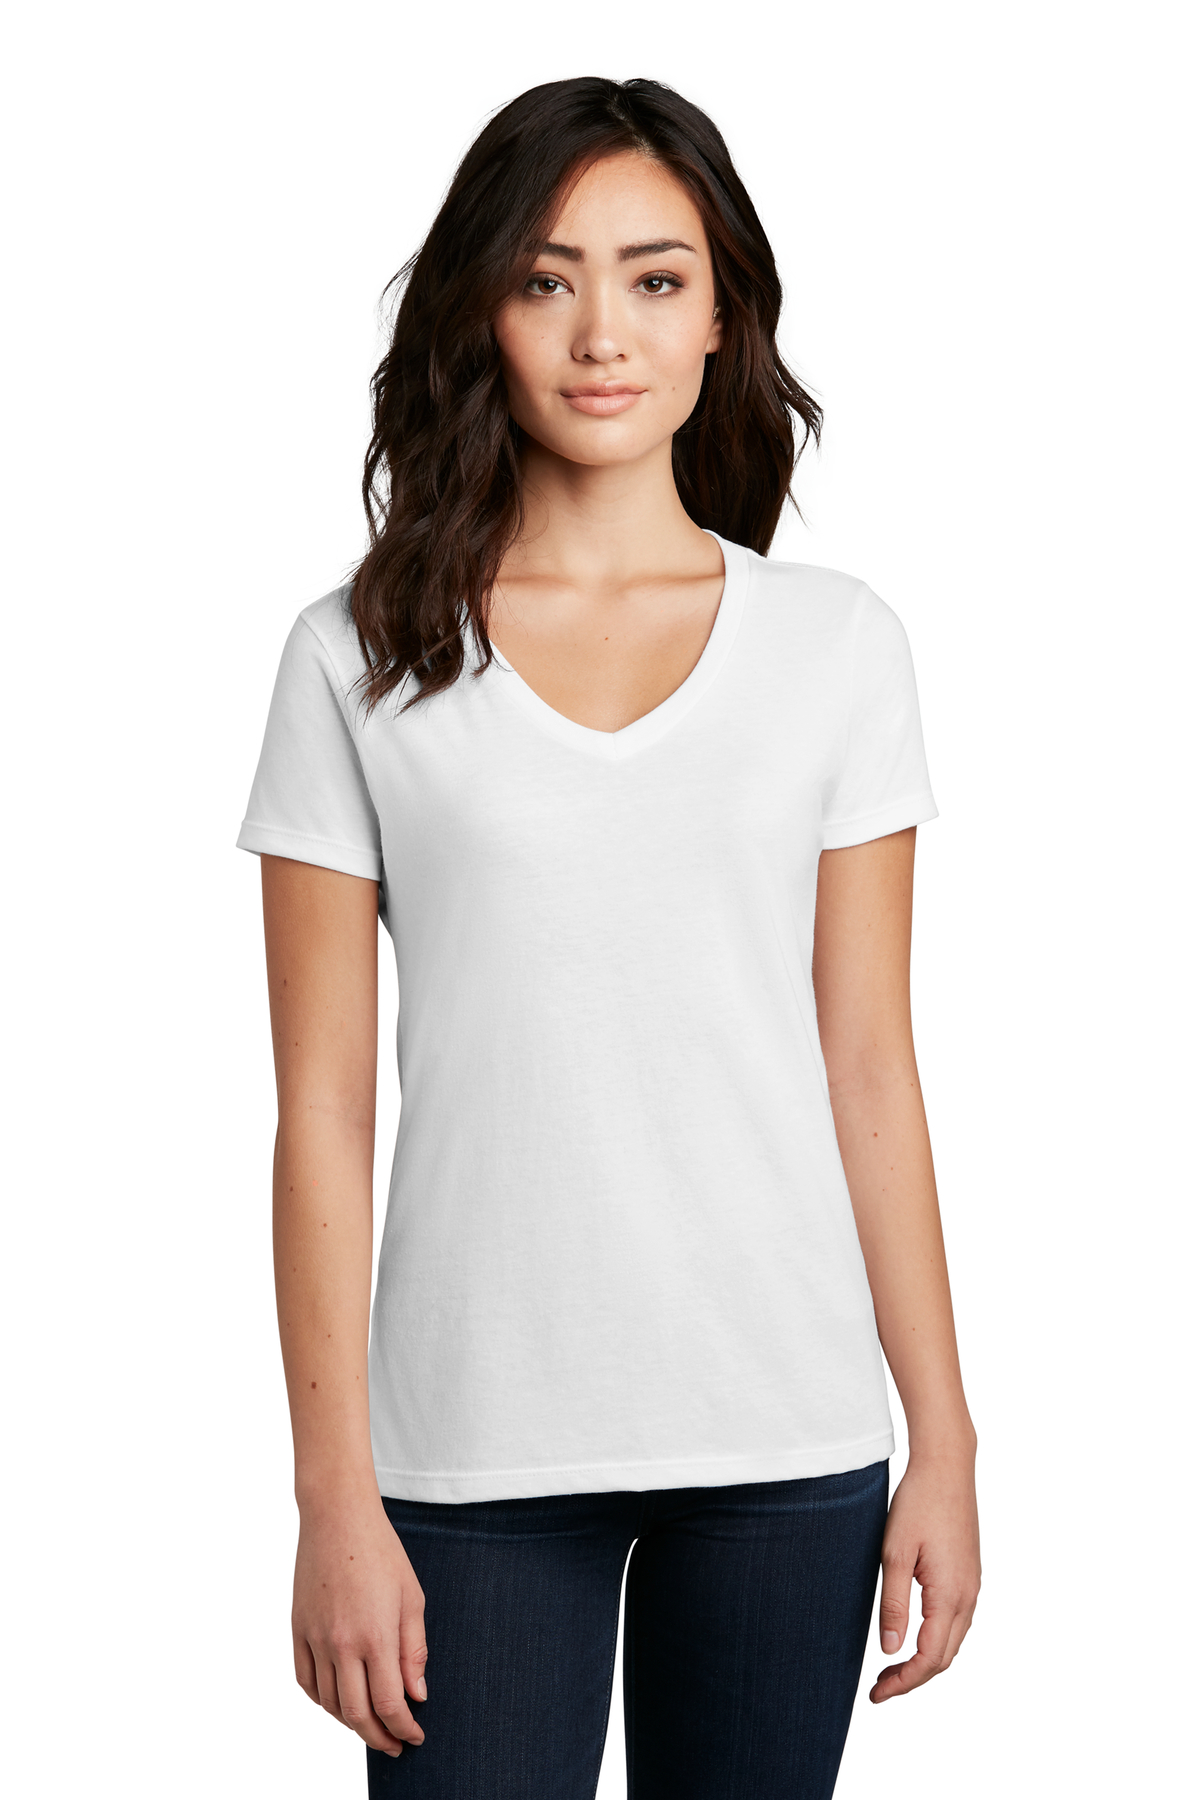 District Embroidered Women's Perfect Blend V-Neck Tee | Women's Apparel ...